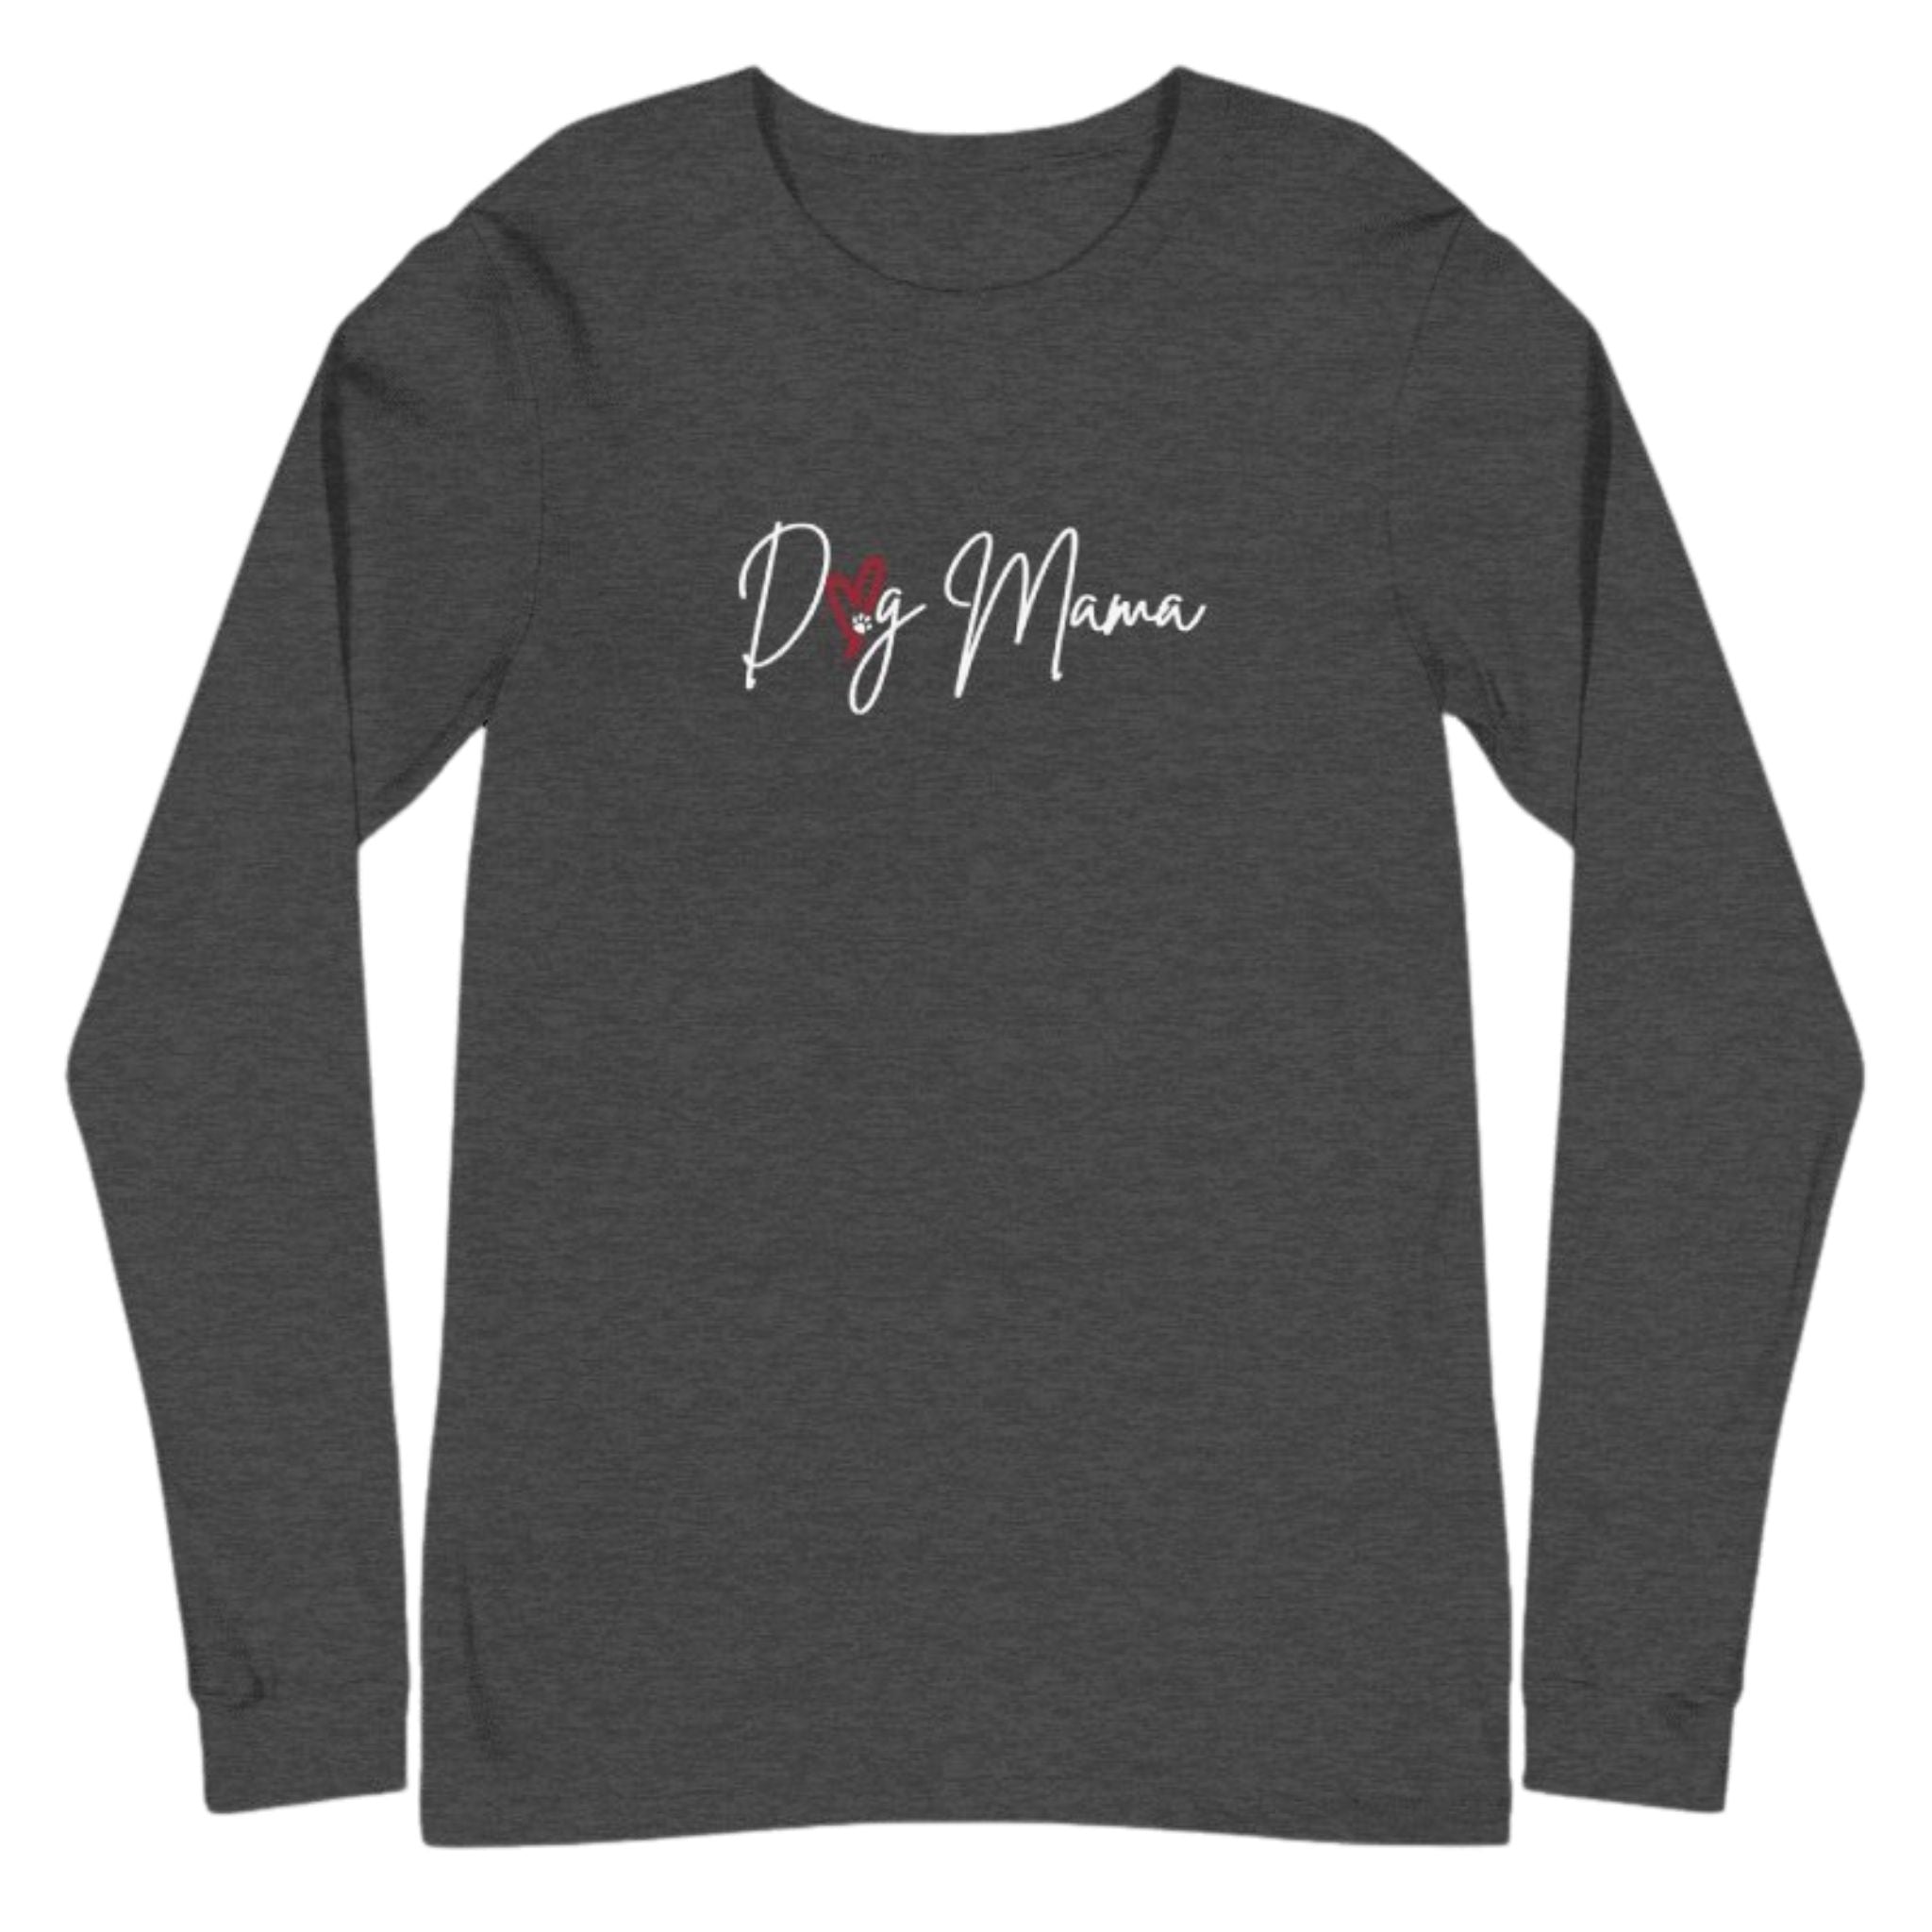 DOG MAMA Stylized Crewneck Long Sleeve T-Shirt | Choice of Placement | Multiple Colors - Long Sleeve T-Shirt